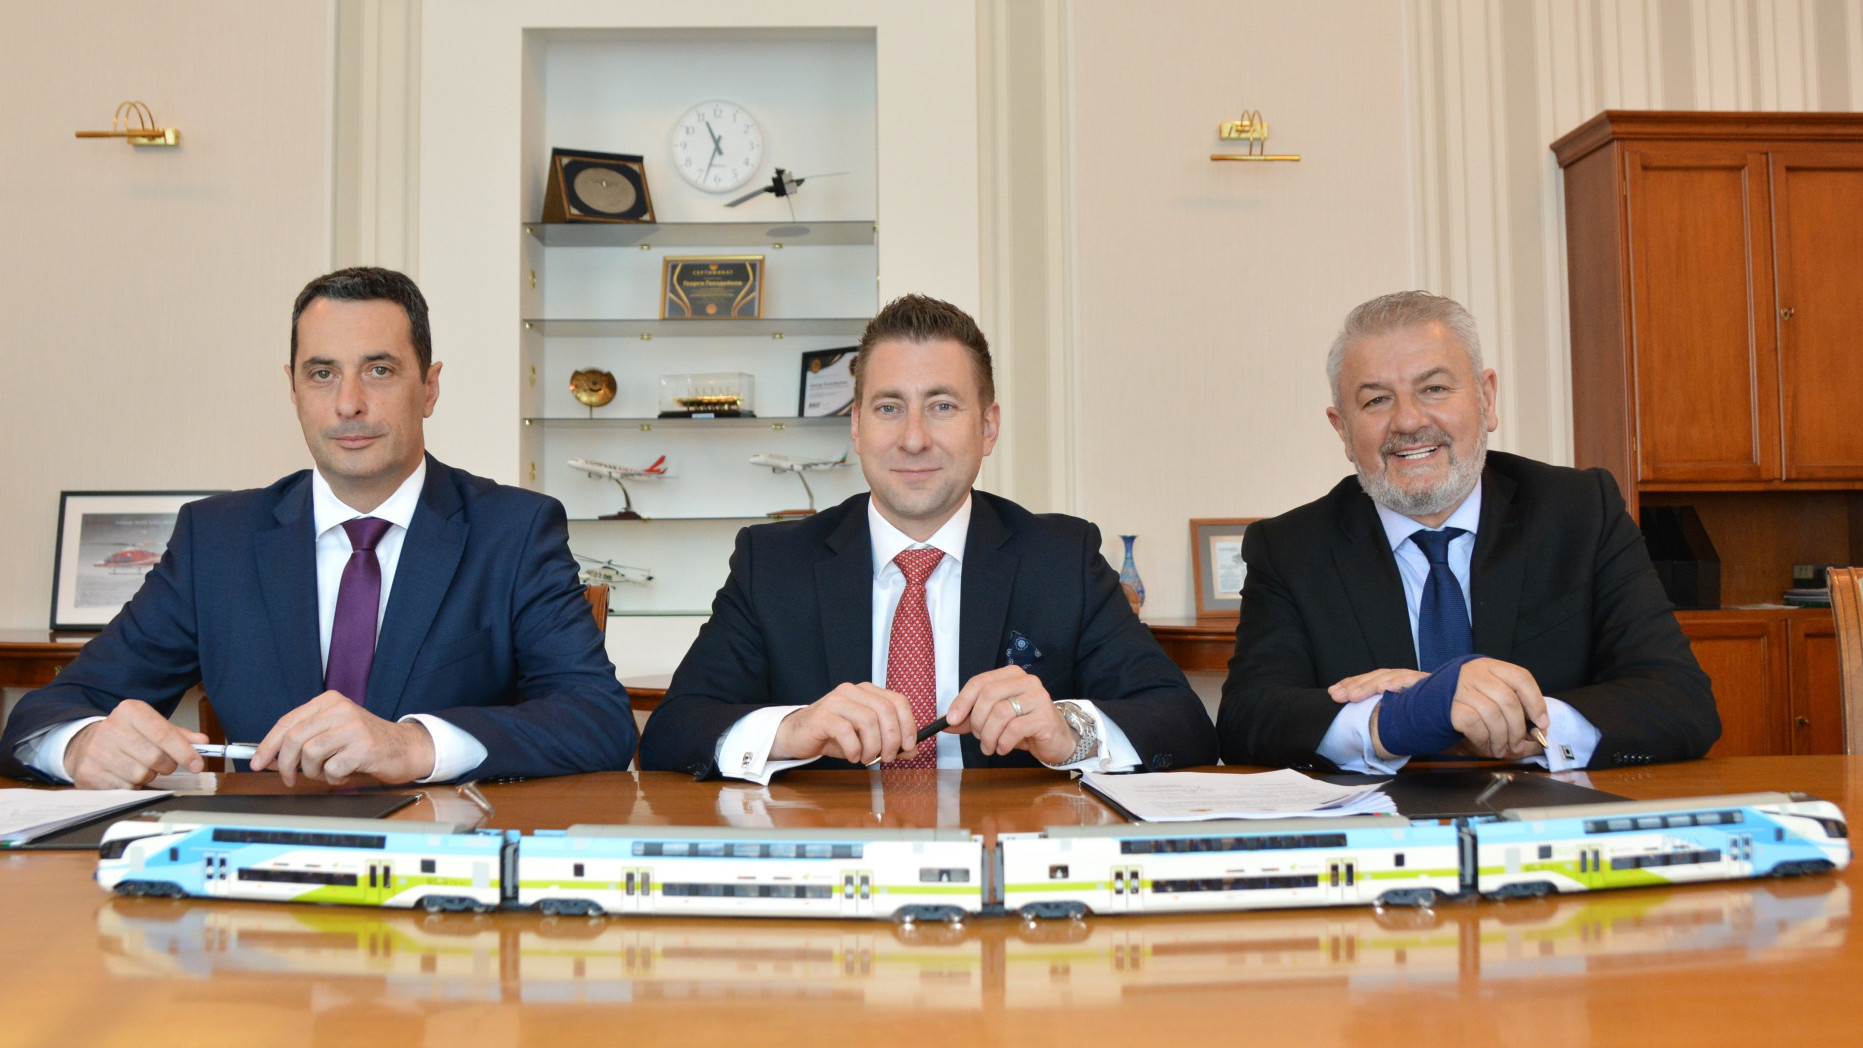 Georgi Gvozdeykov: Bulgaria will have new railway rolling stock after more than 20 years of waiting